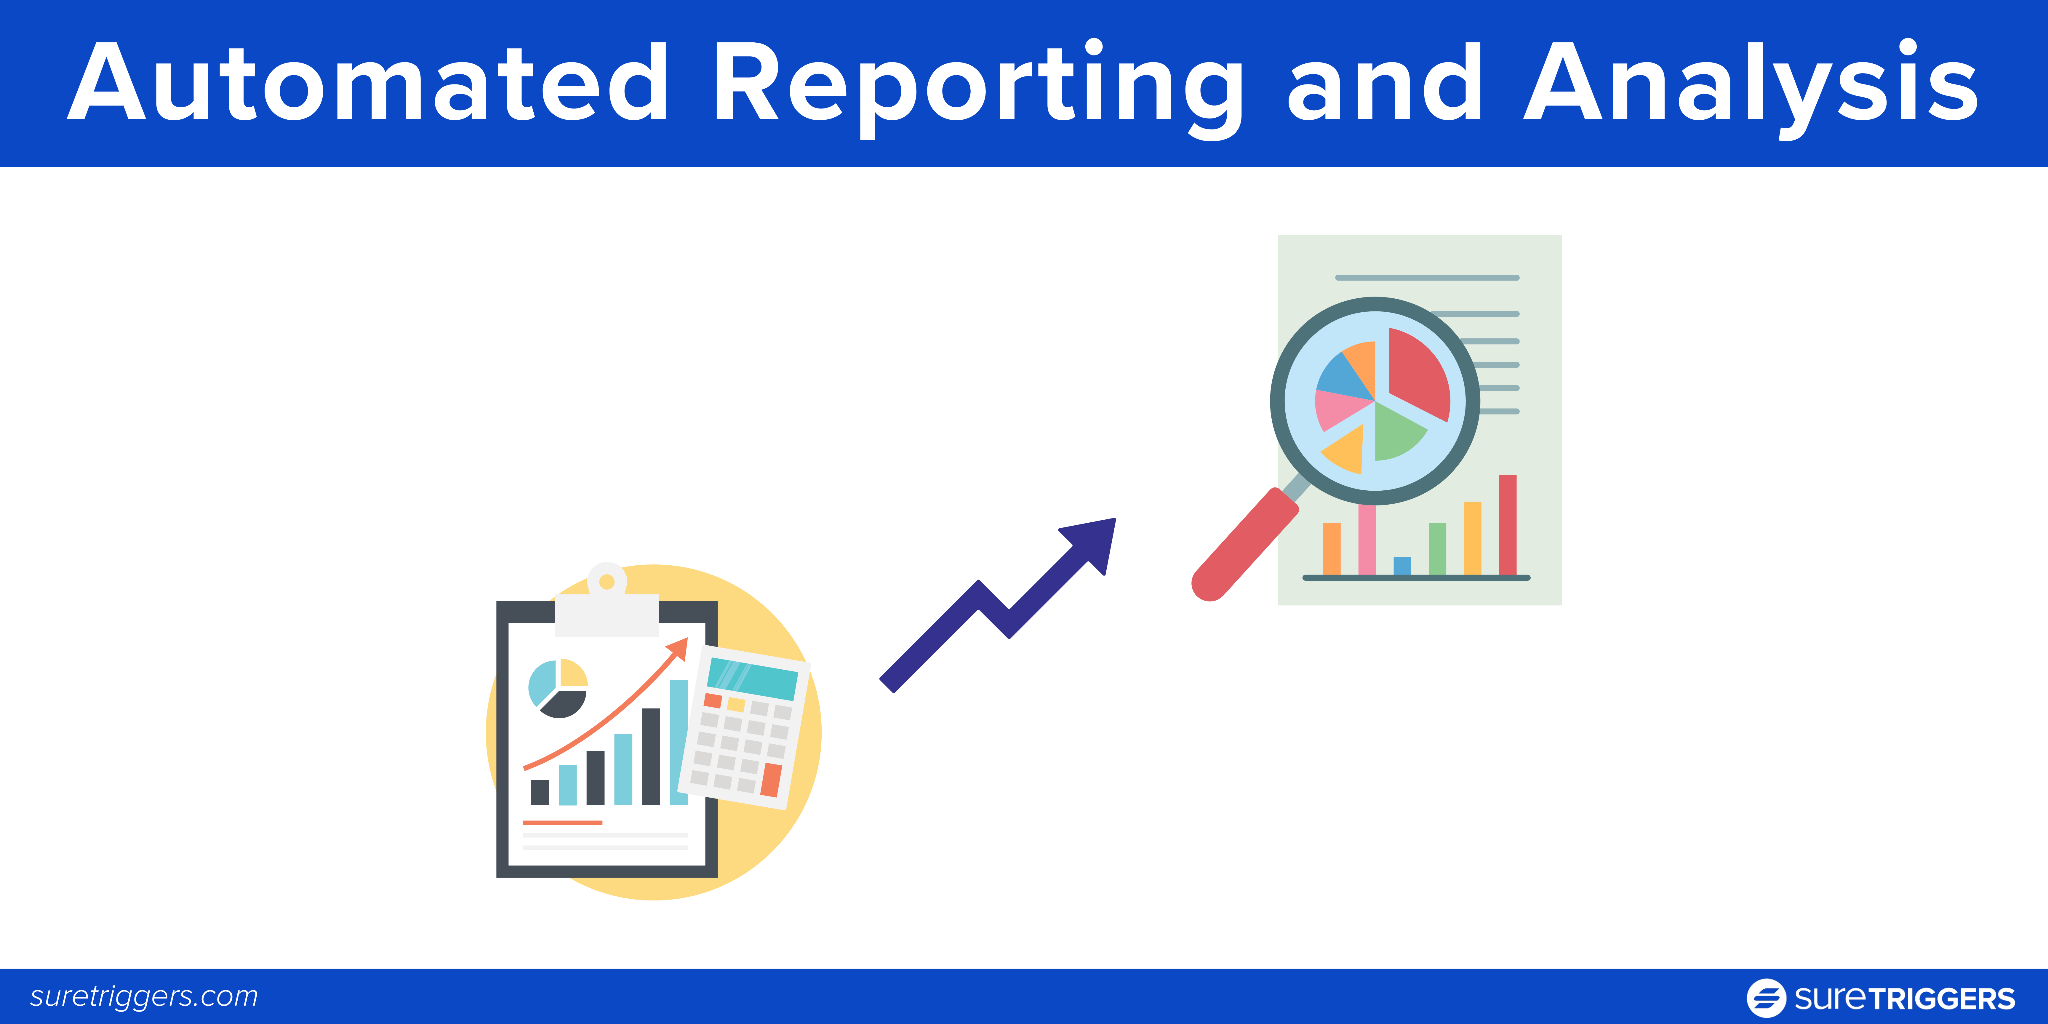 Automated Reporting and Analysis: Ditch the Spreadsheets
